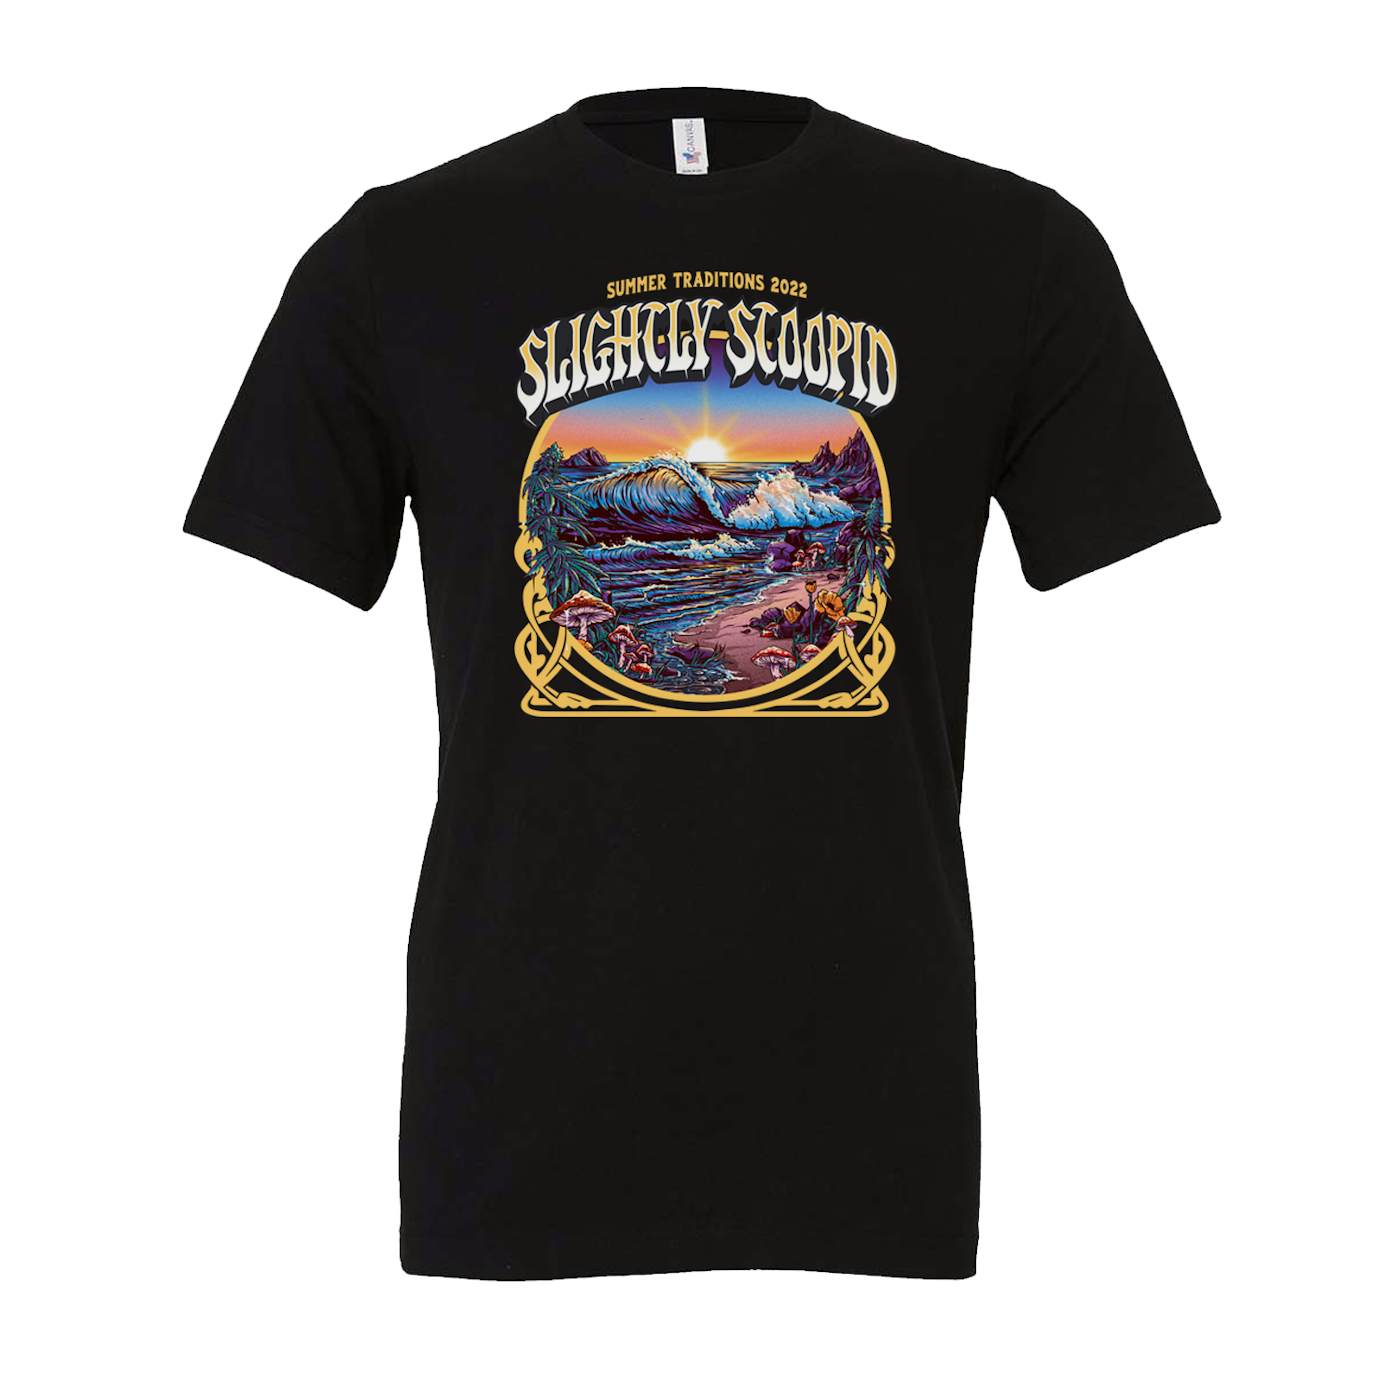 Slightly Stoopid Summer Traditions 2022 Tour Tee